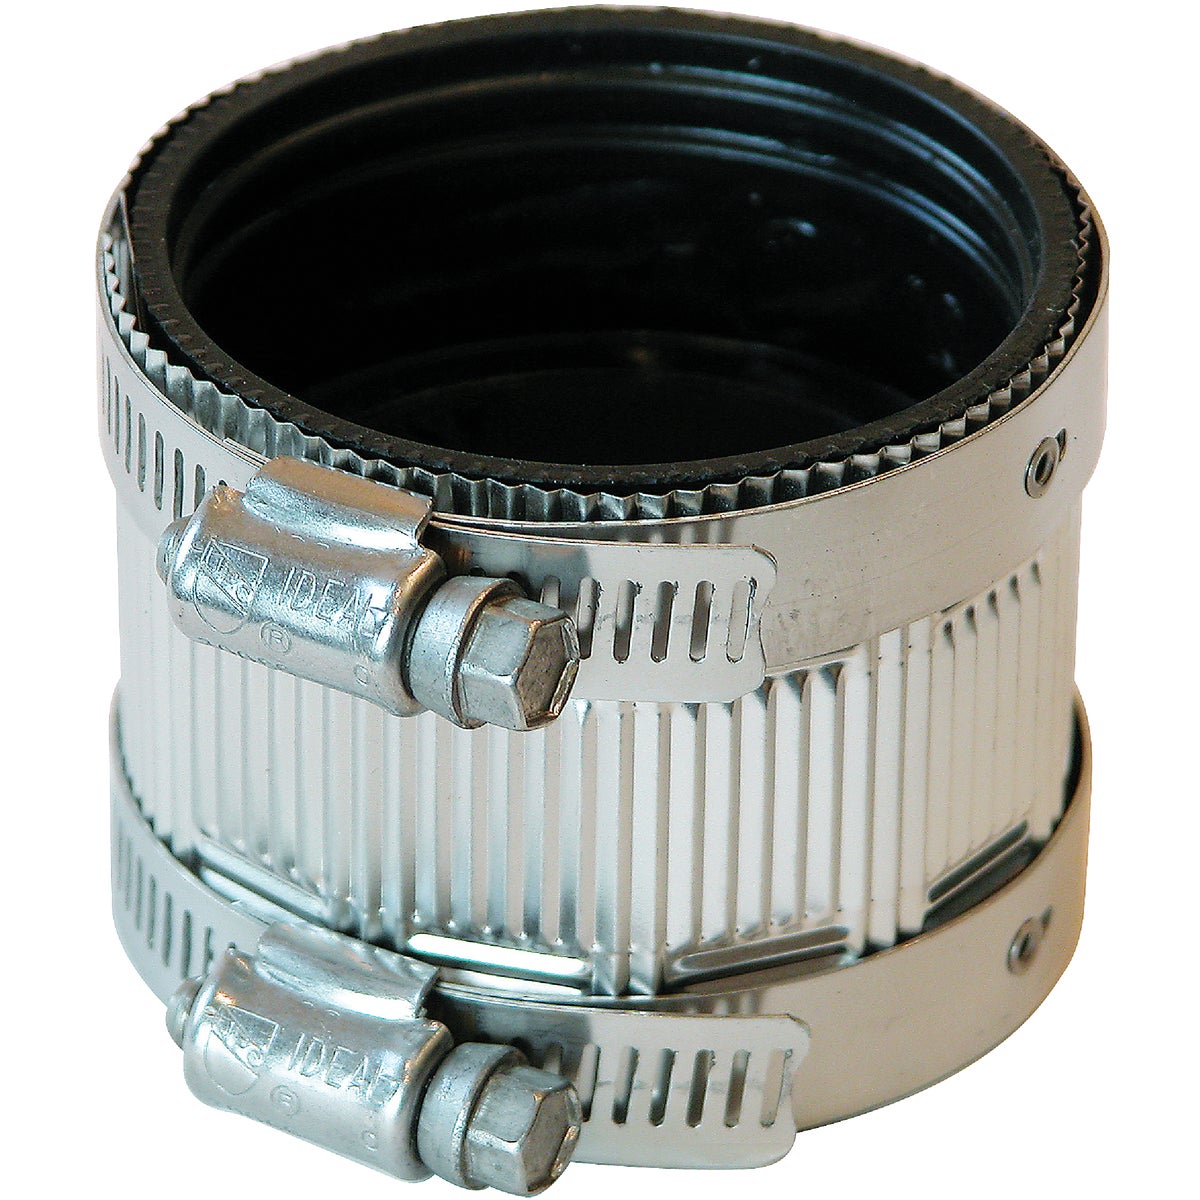 Item 407269, No-hub coupling made of 100% neoprene with stainless steel clamps.